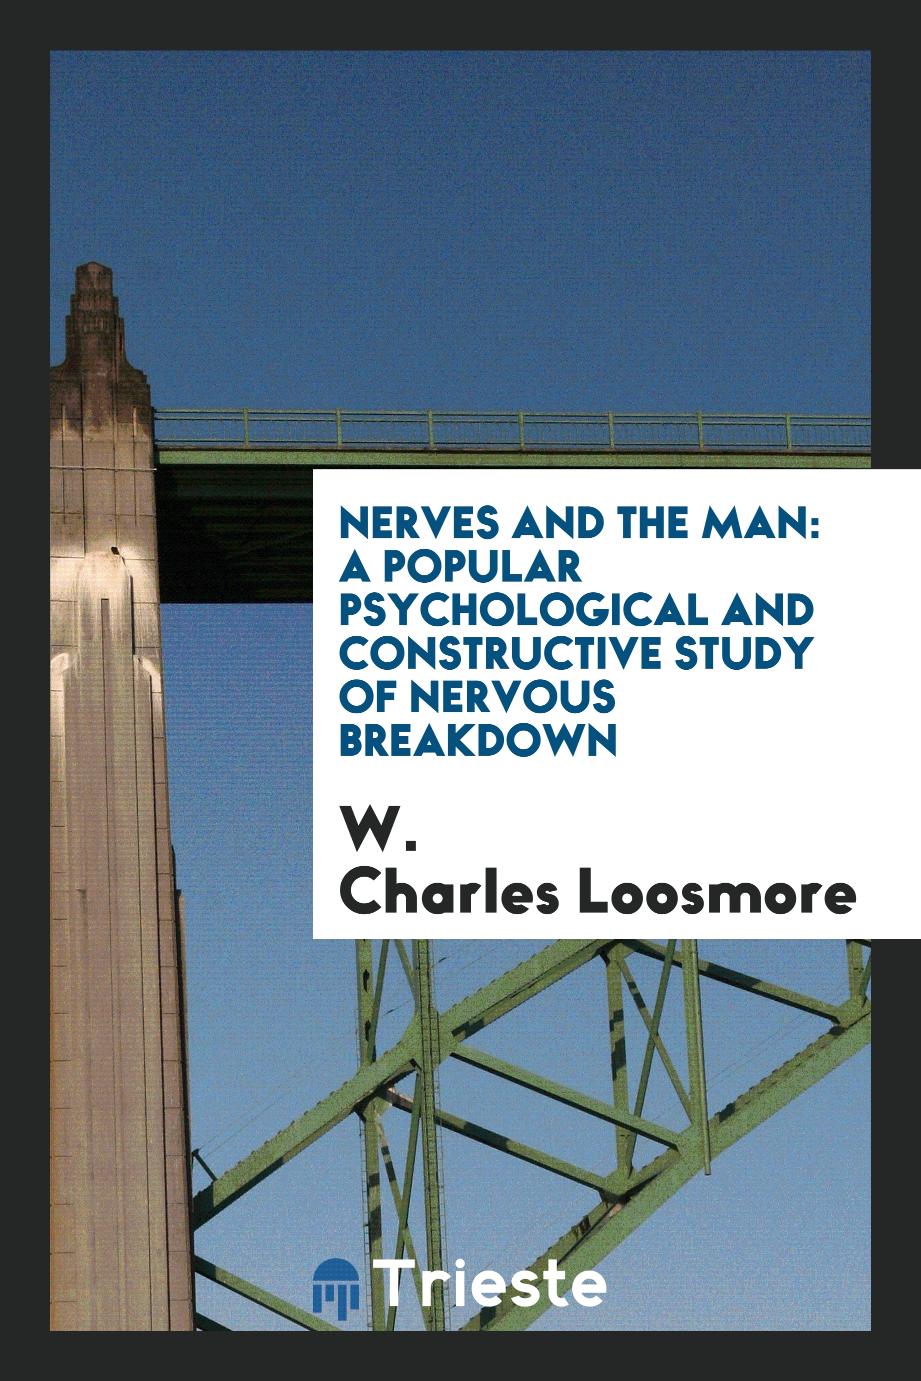 Nerves and the man: a popular psychological and constructive study of nervous breakdown